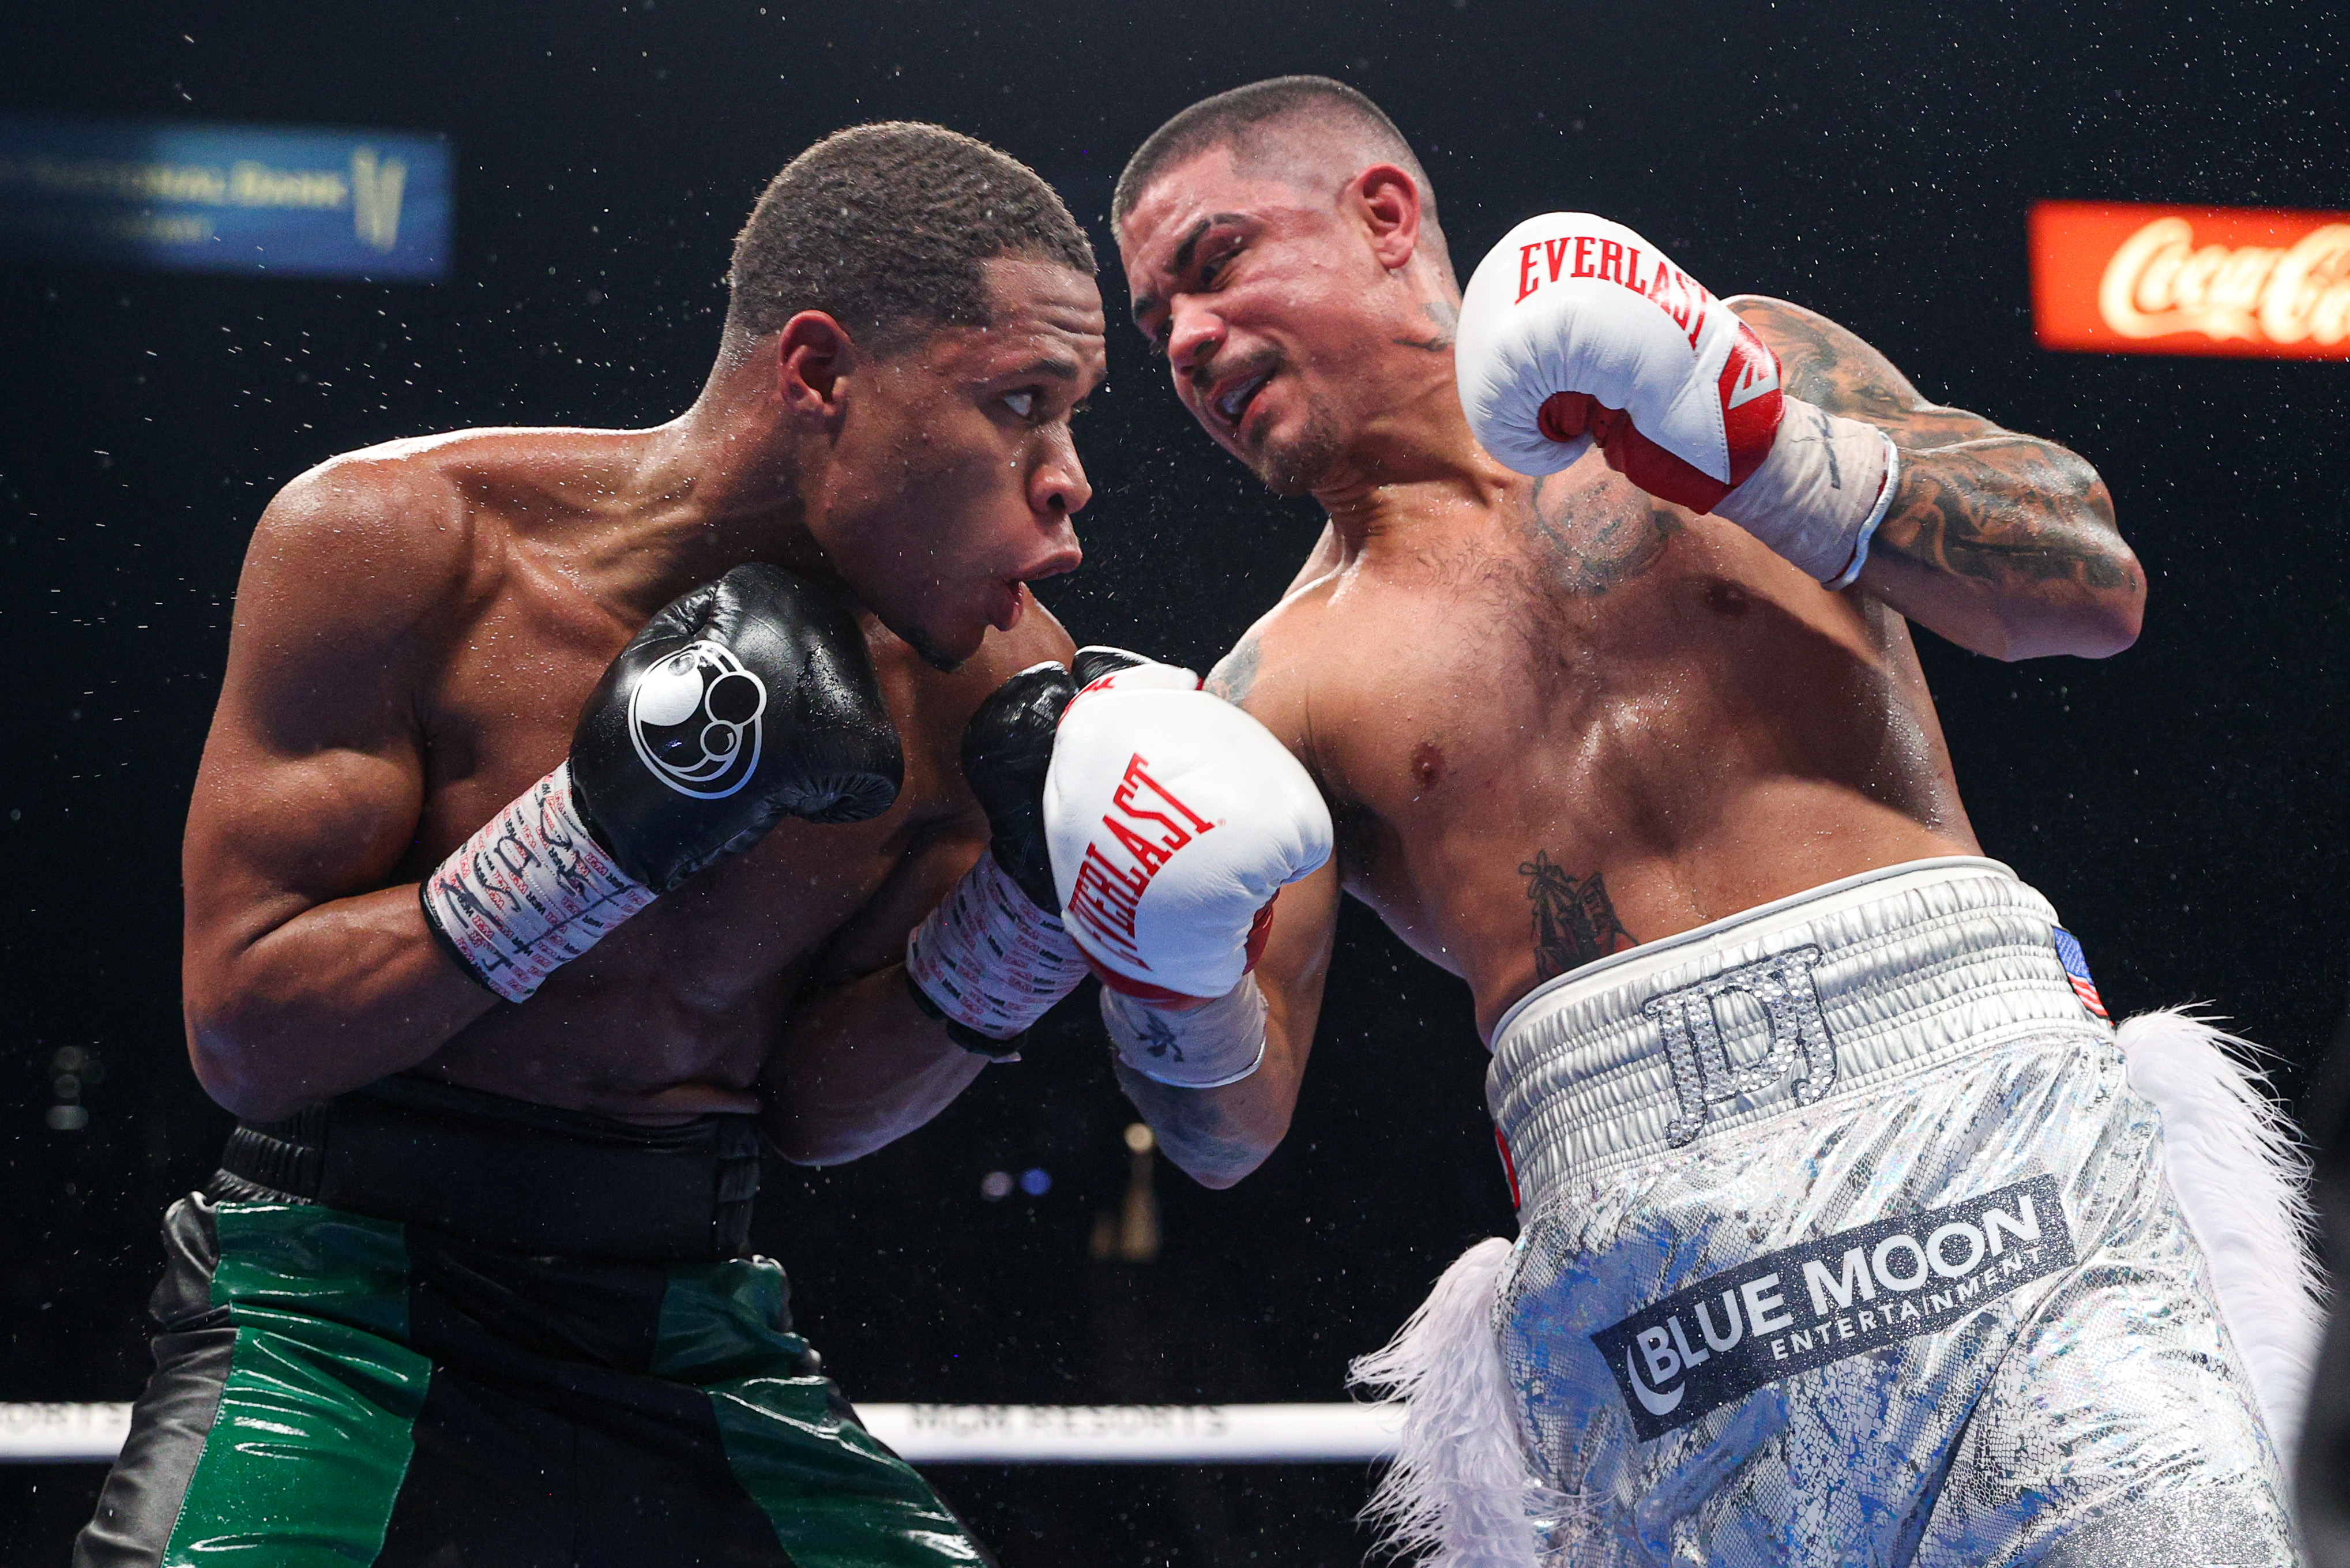 Devin Haney was just a bit too much for JoJo Diaz Jr, retaining his WBC belt